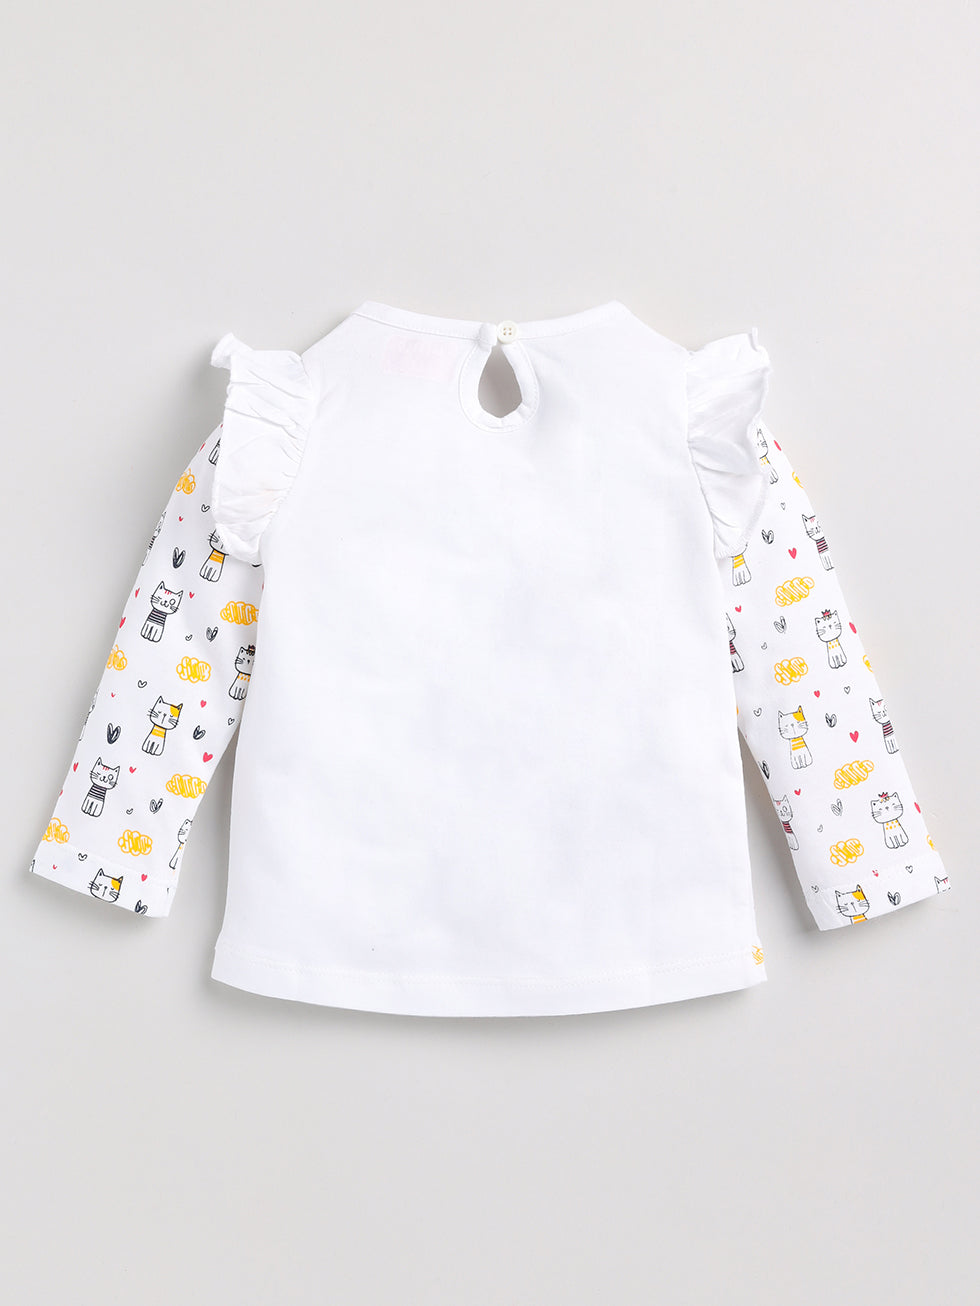 Infant Girls Round Neck Printed Top Full Sleeve